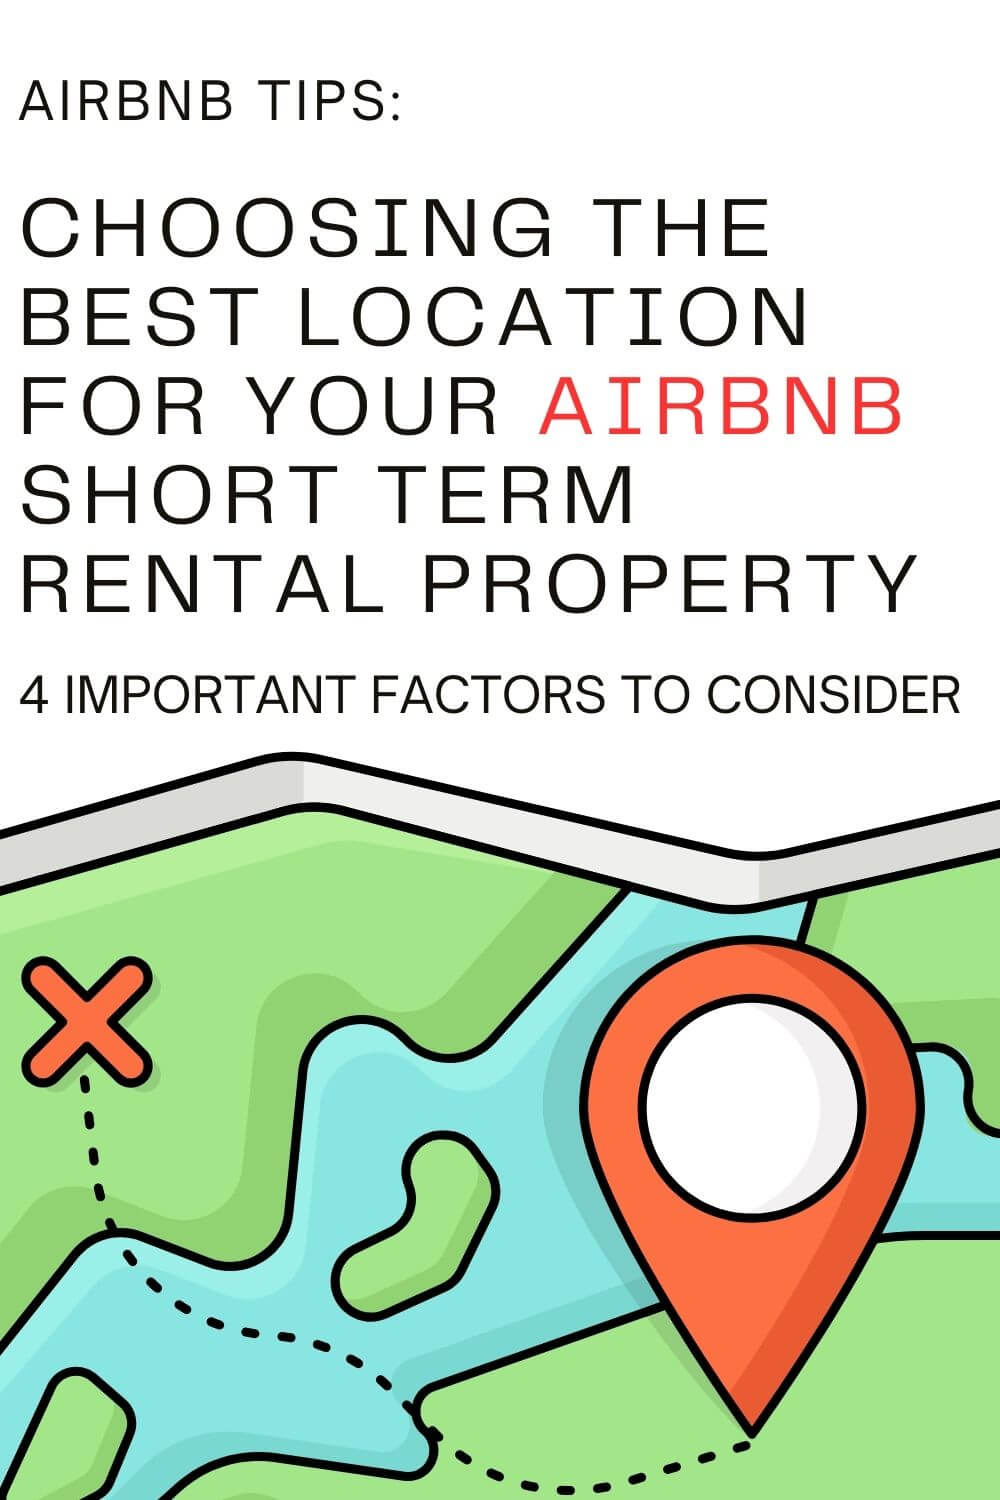 Airbnb tips For Choosing a Location to Purchase